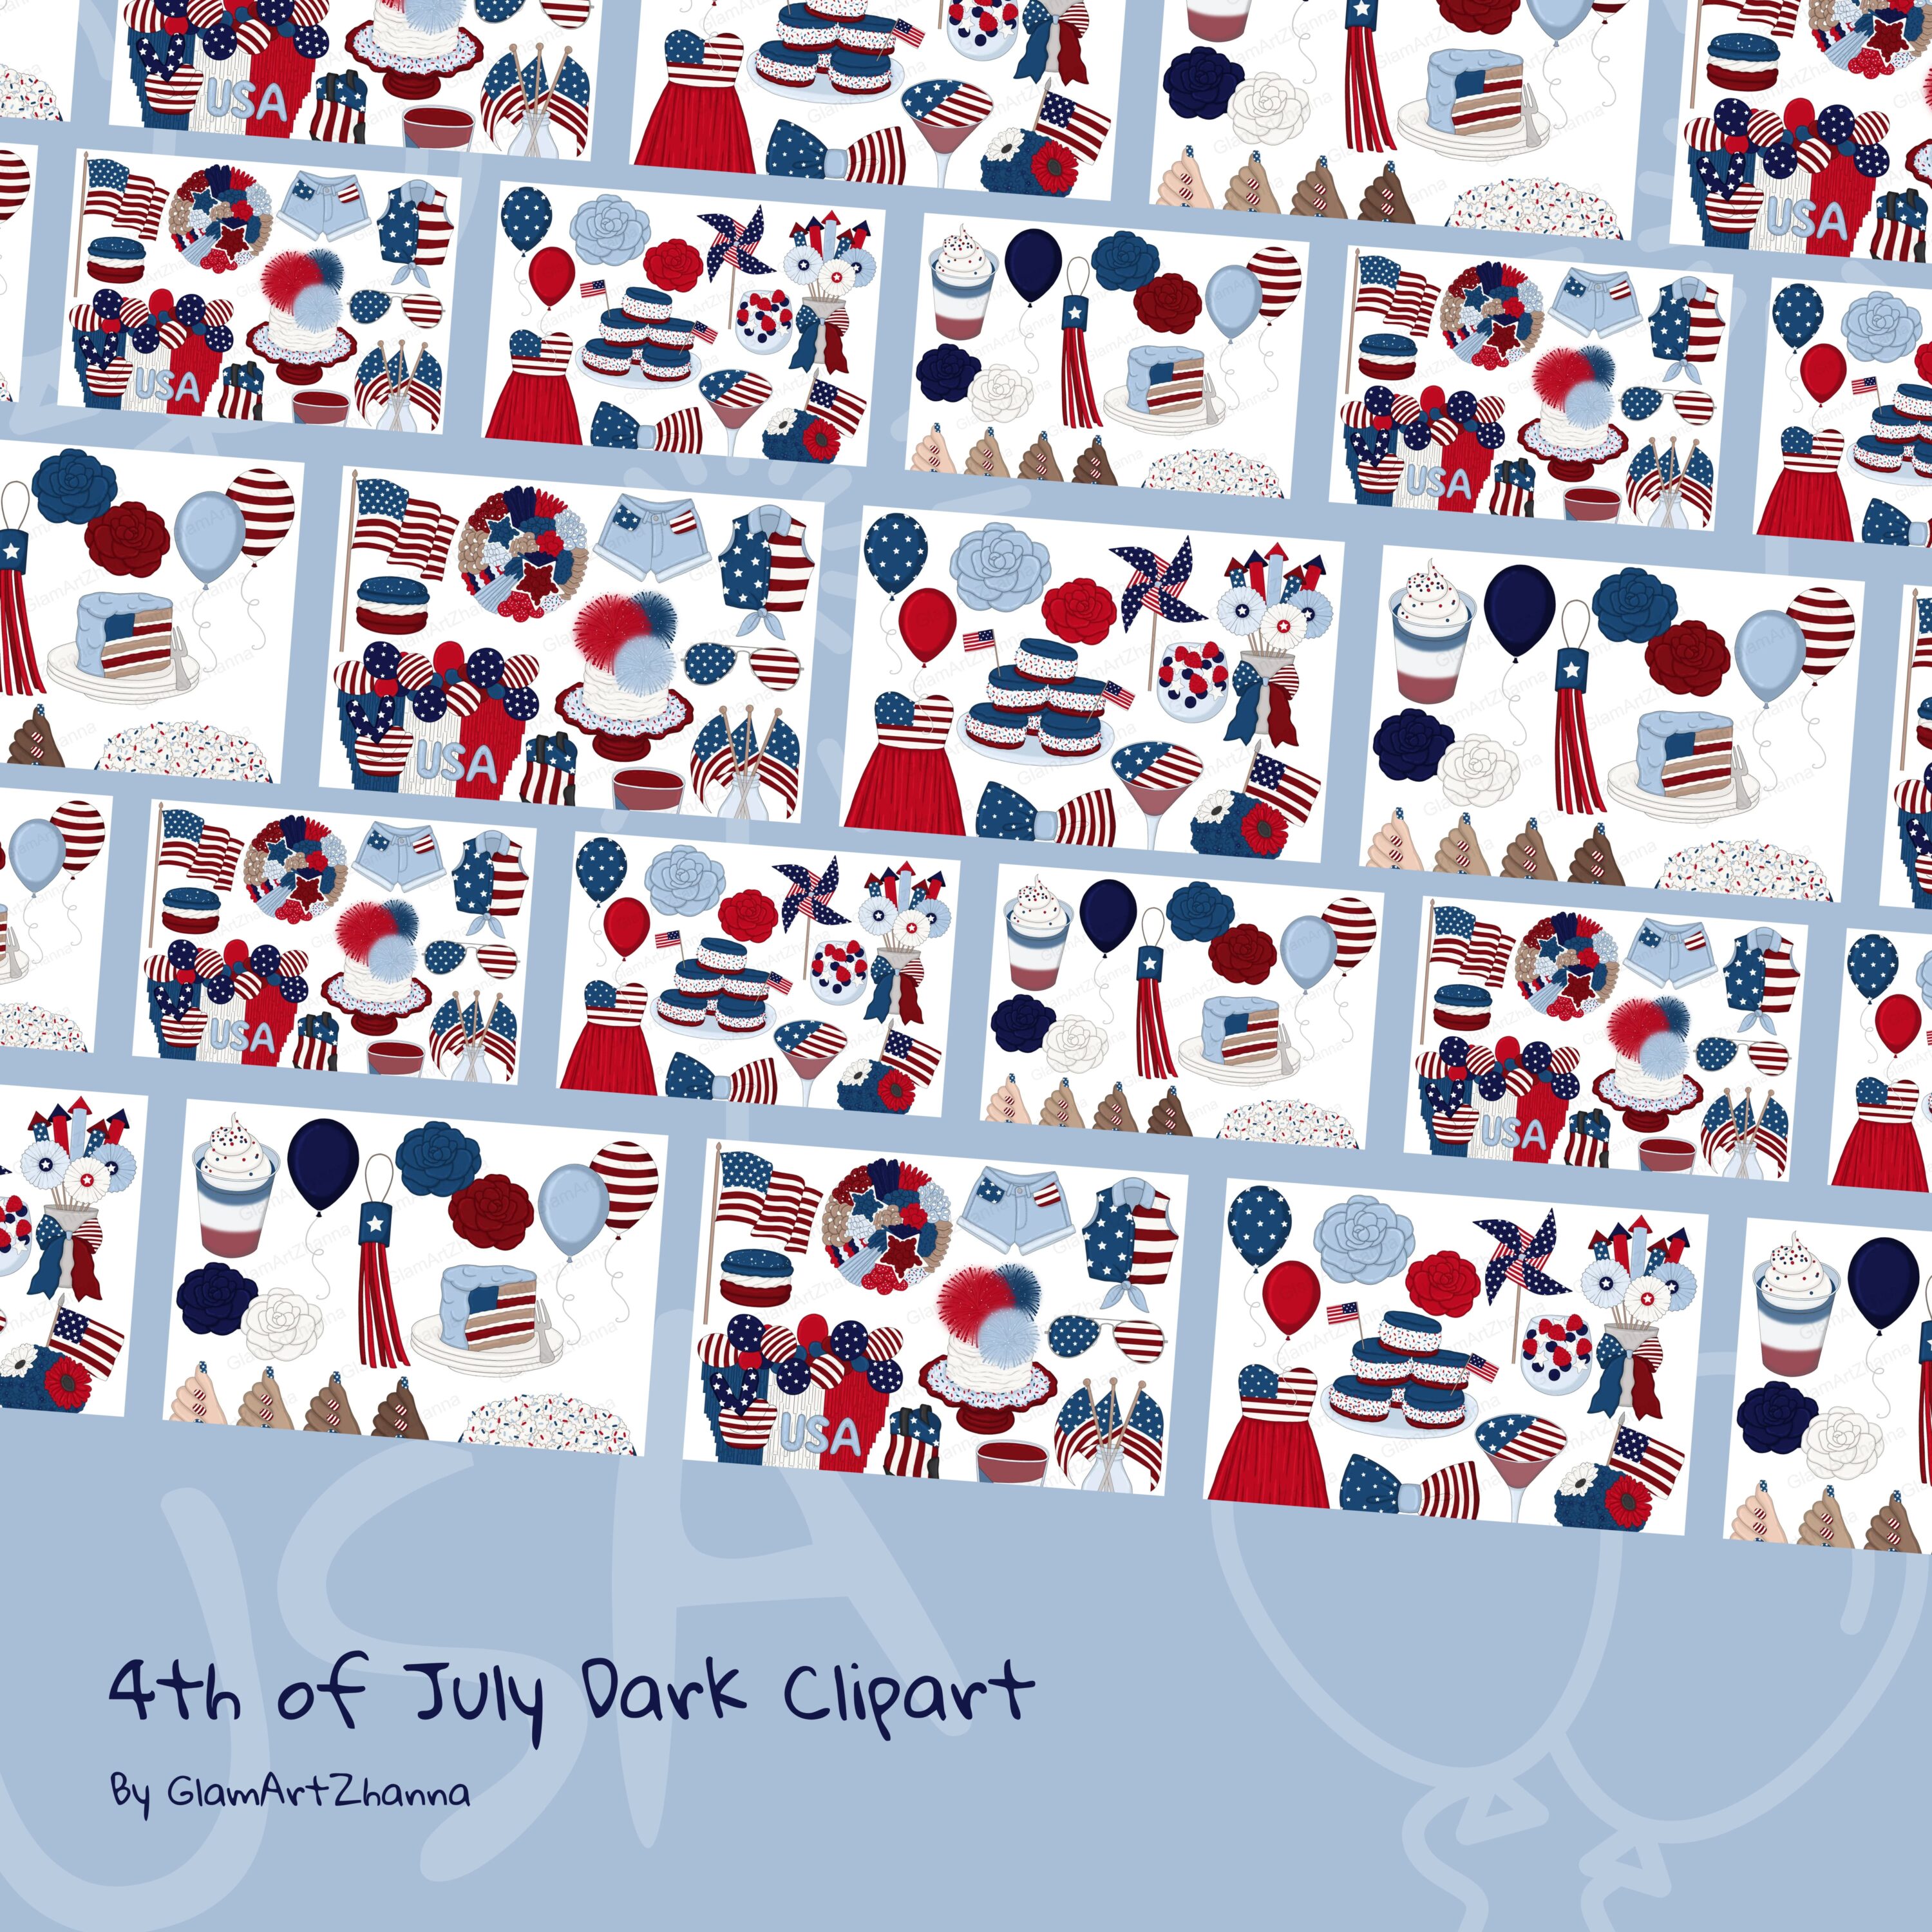 4th of july dark clipart.